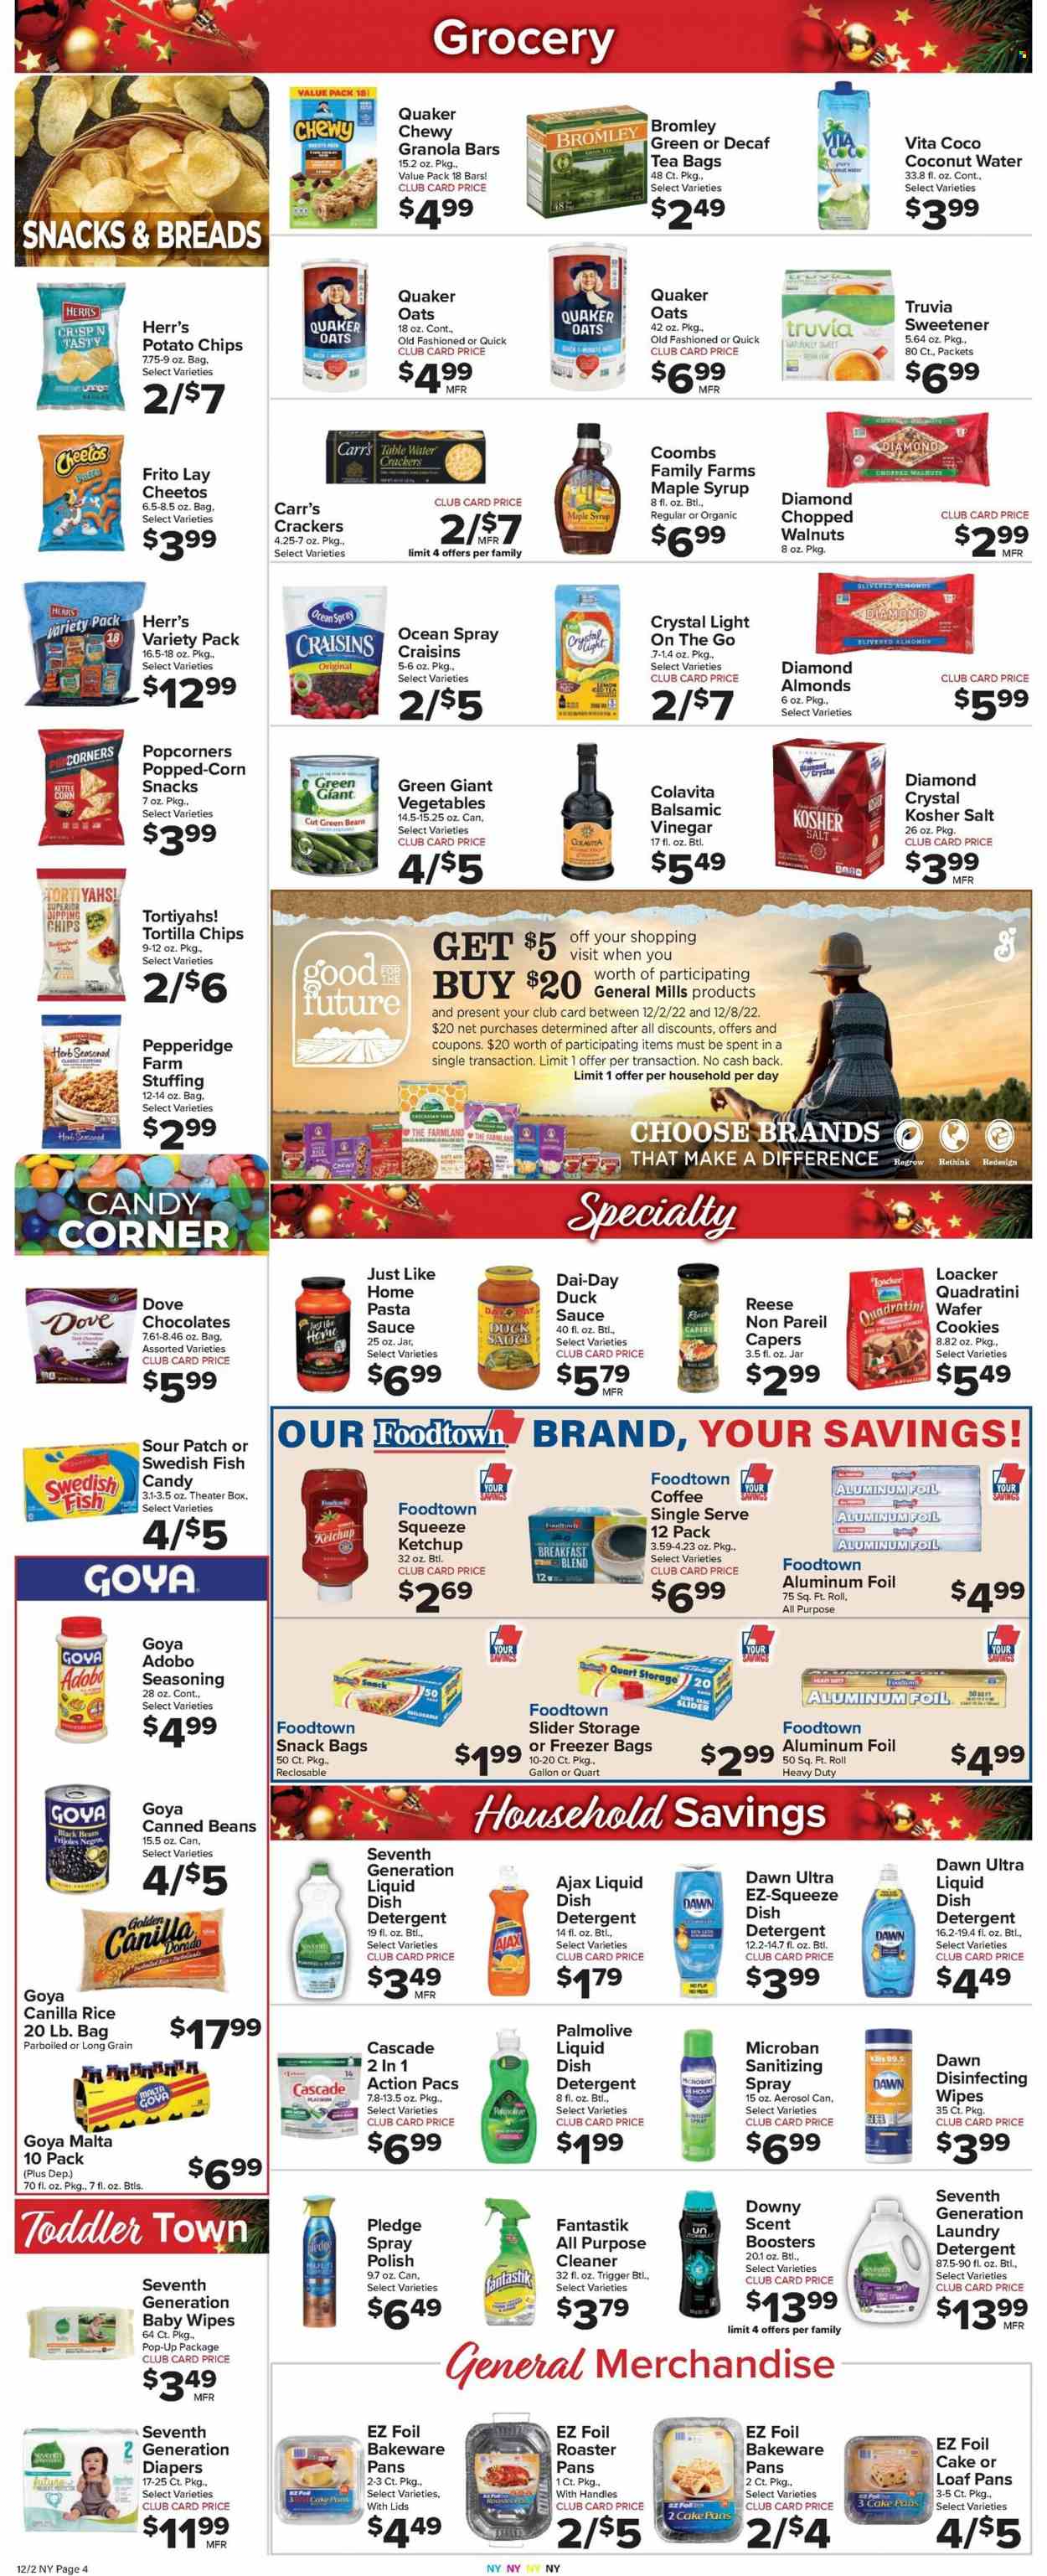 thumbnail - Foodtown Flyer - 12/02/2022 - 12/08/2022 - Sales products - cake, puffs, green beans, pasta sauce, sauce, Quaker, cookies, Dove, wafers, chocolate, crackers, dark chocolate, Sour Patch, tortilla chips, kettle corn, potato chips, Cheetos, chips, popcorn, oats, stevia, sweetener, black beans, capers, craisins, Goya, granola bar, rice, spice, adobo sauce, duck sauce, ketchup, balsamic vinegar, maple syrup, honey, syrup, almonds, walnuts, coconut water, tea bags, coffee, breakfast blend, wipes, baby wipes, nappies, detergent, cleaner, all purpose cleaner, Ajax, Pledge, Cascade, laundry detergent, scent booster, dishwasher cleaner, Palmolive, Sure, polish, pan, bakeware, aluminium foil, freezer bag. Page 4.